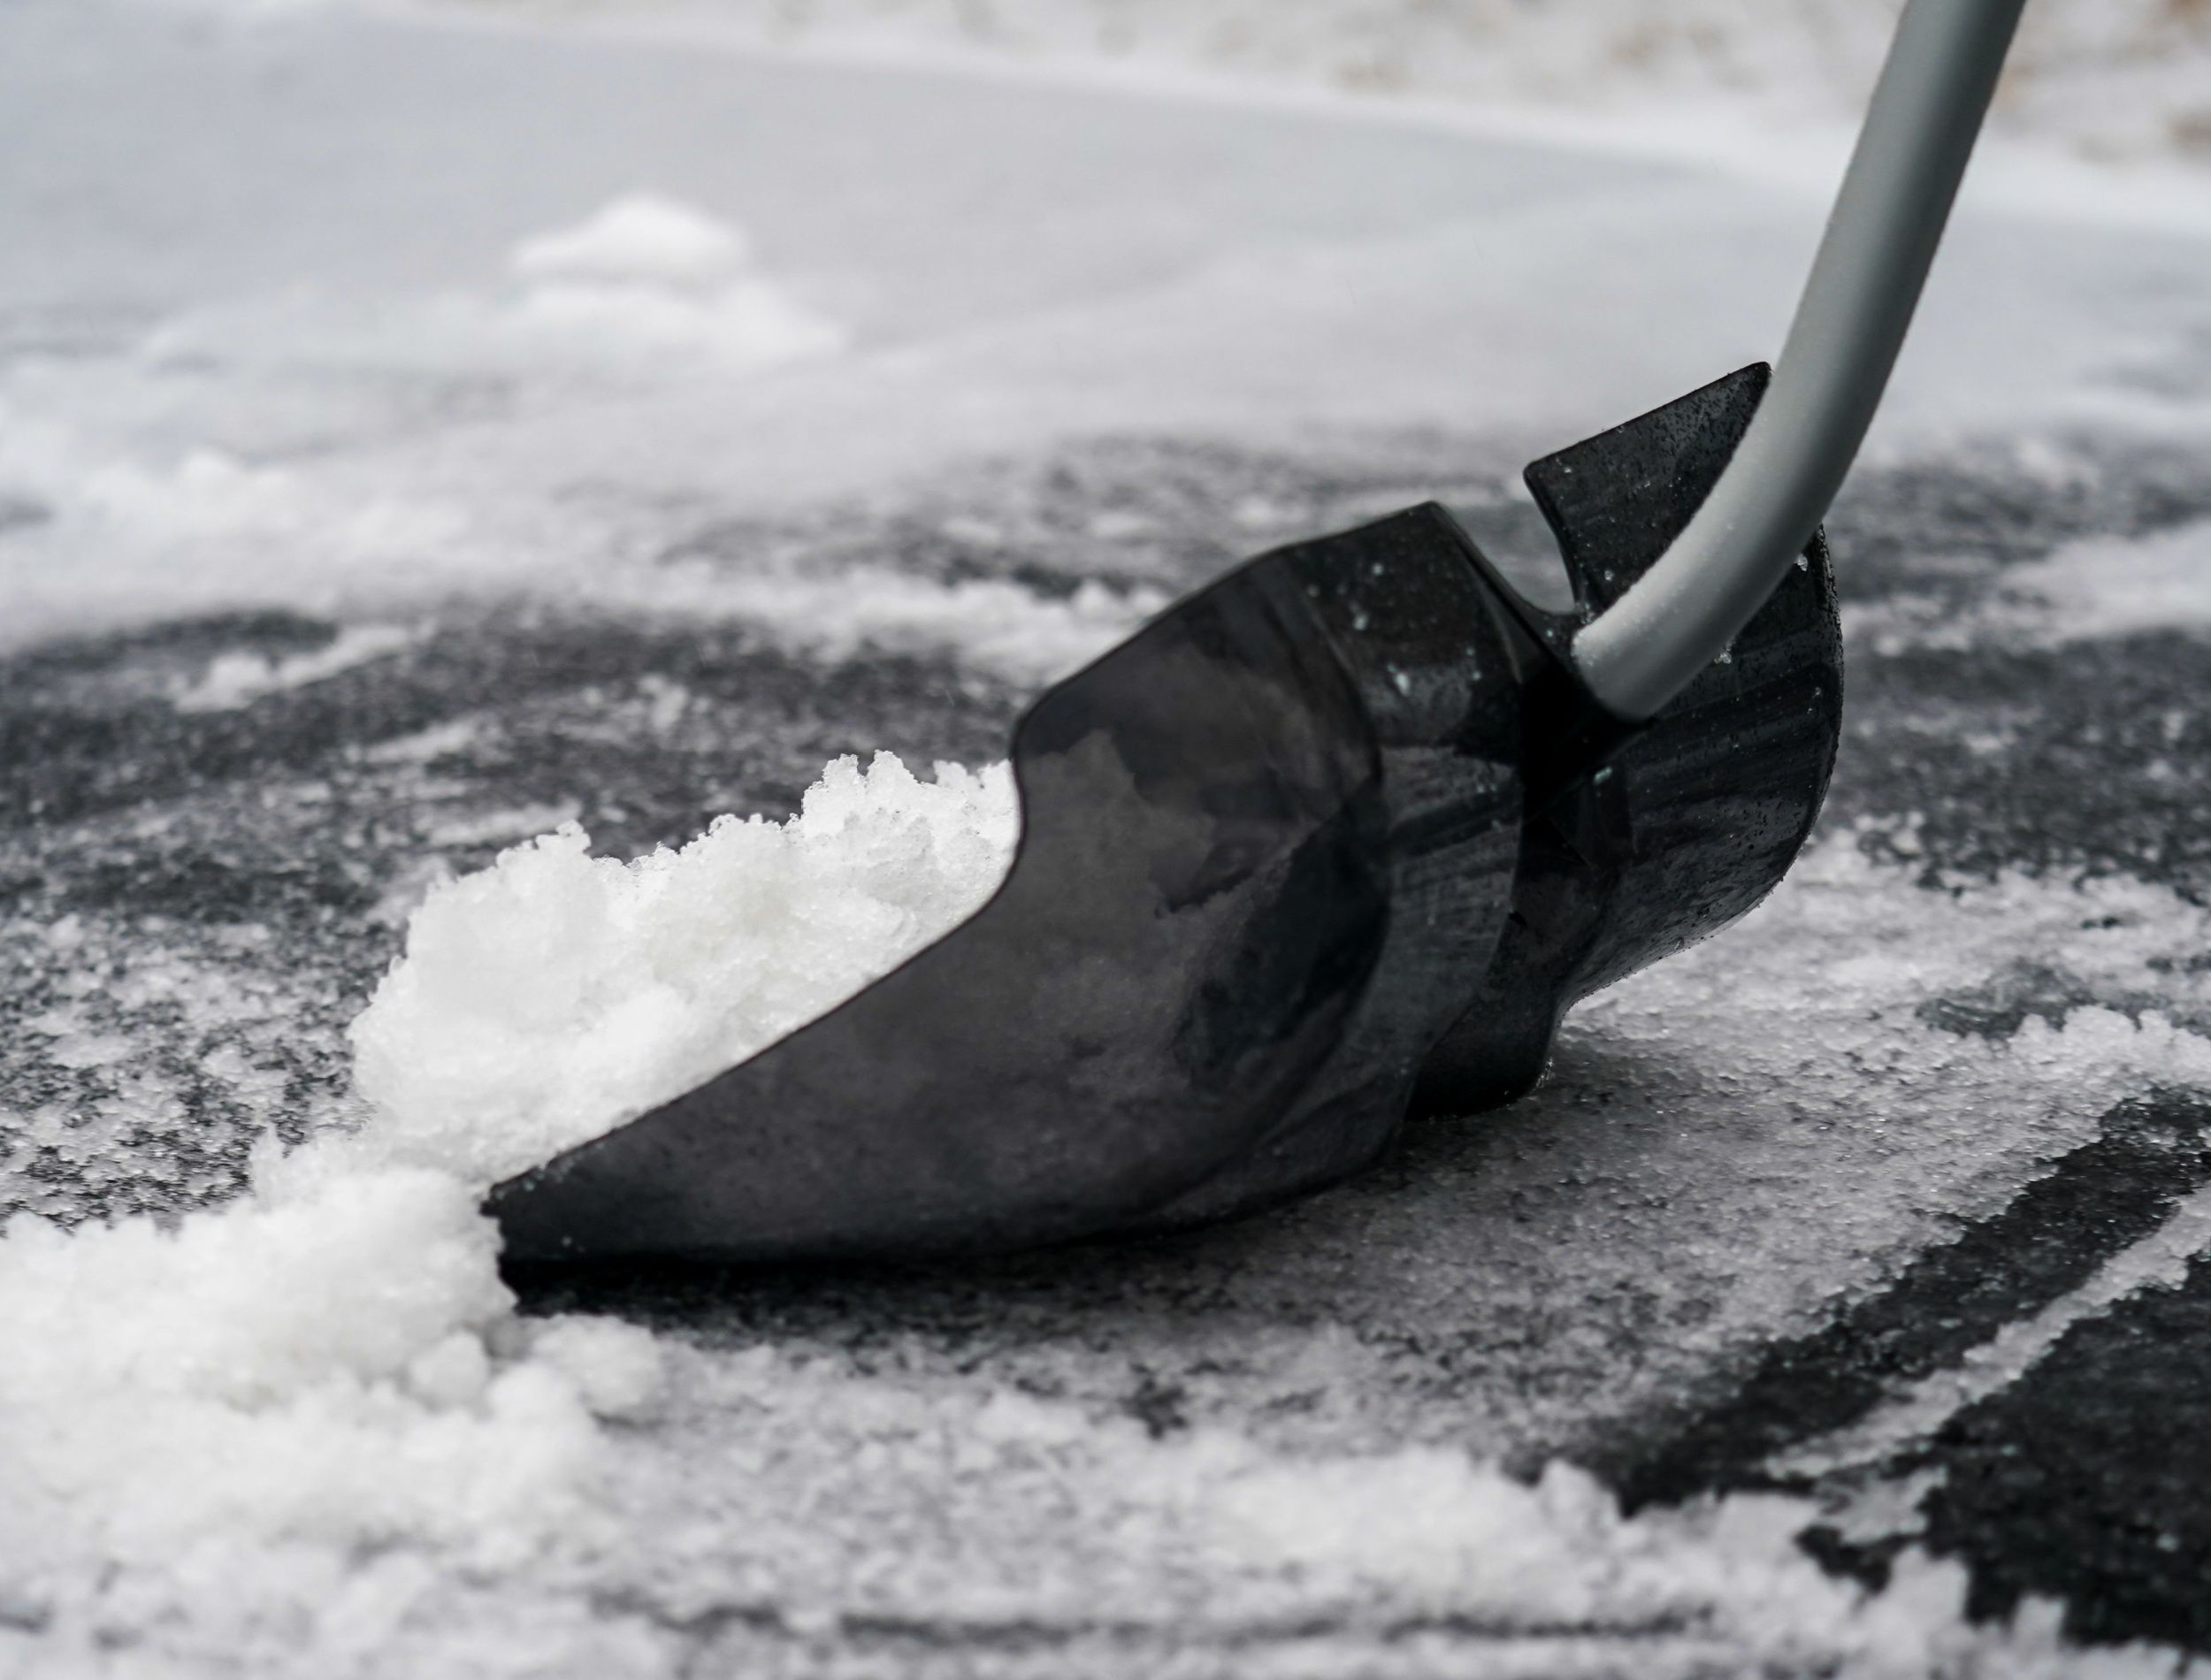 Ergonomic polycarbonate shovel clearing ice and sleet off a driveway